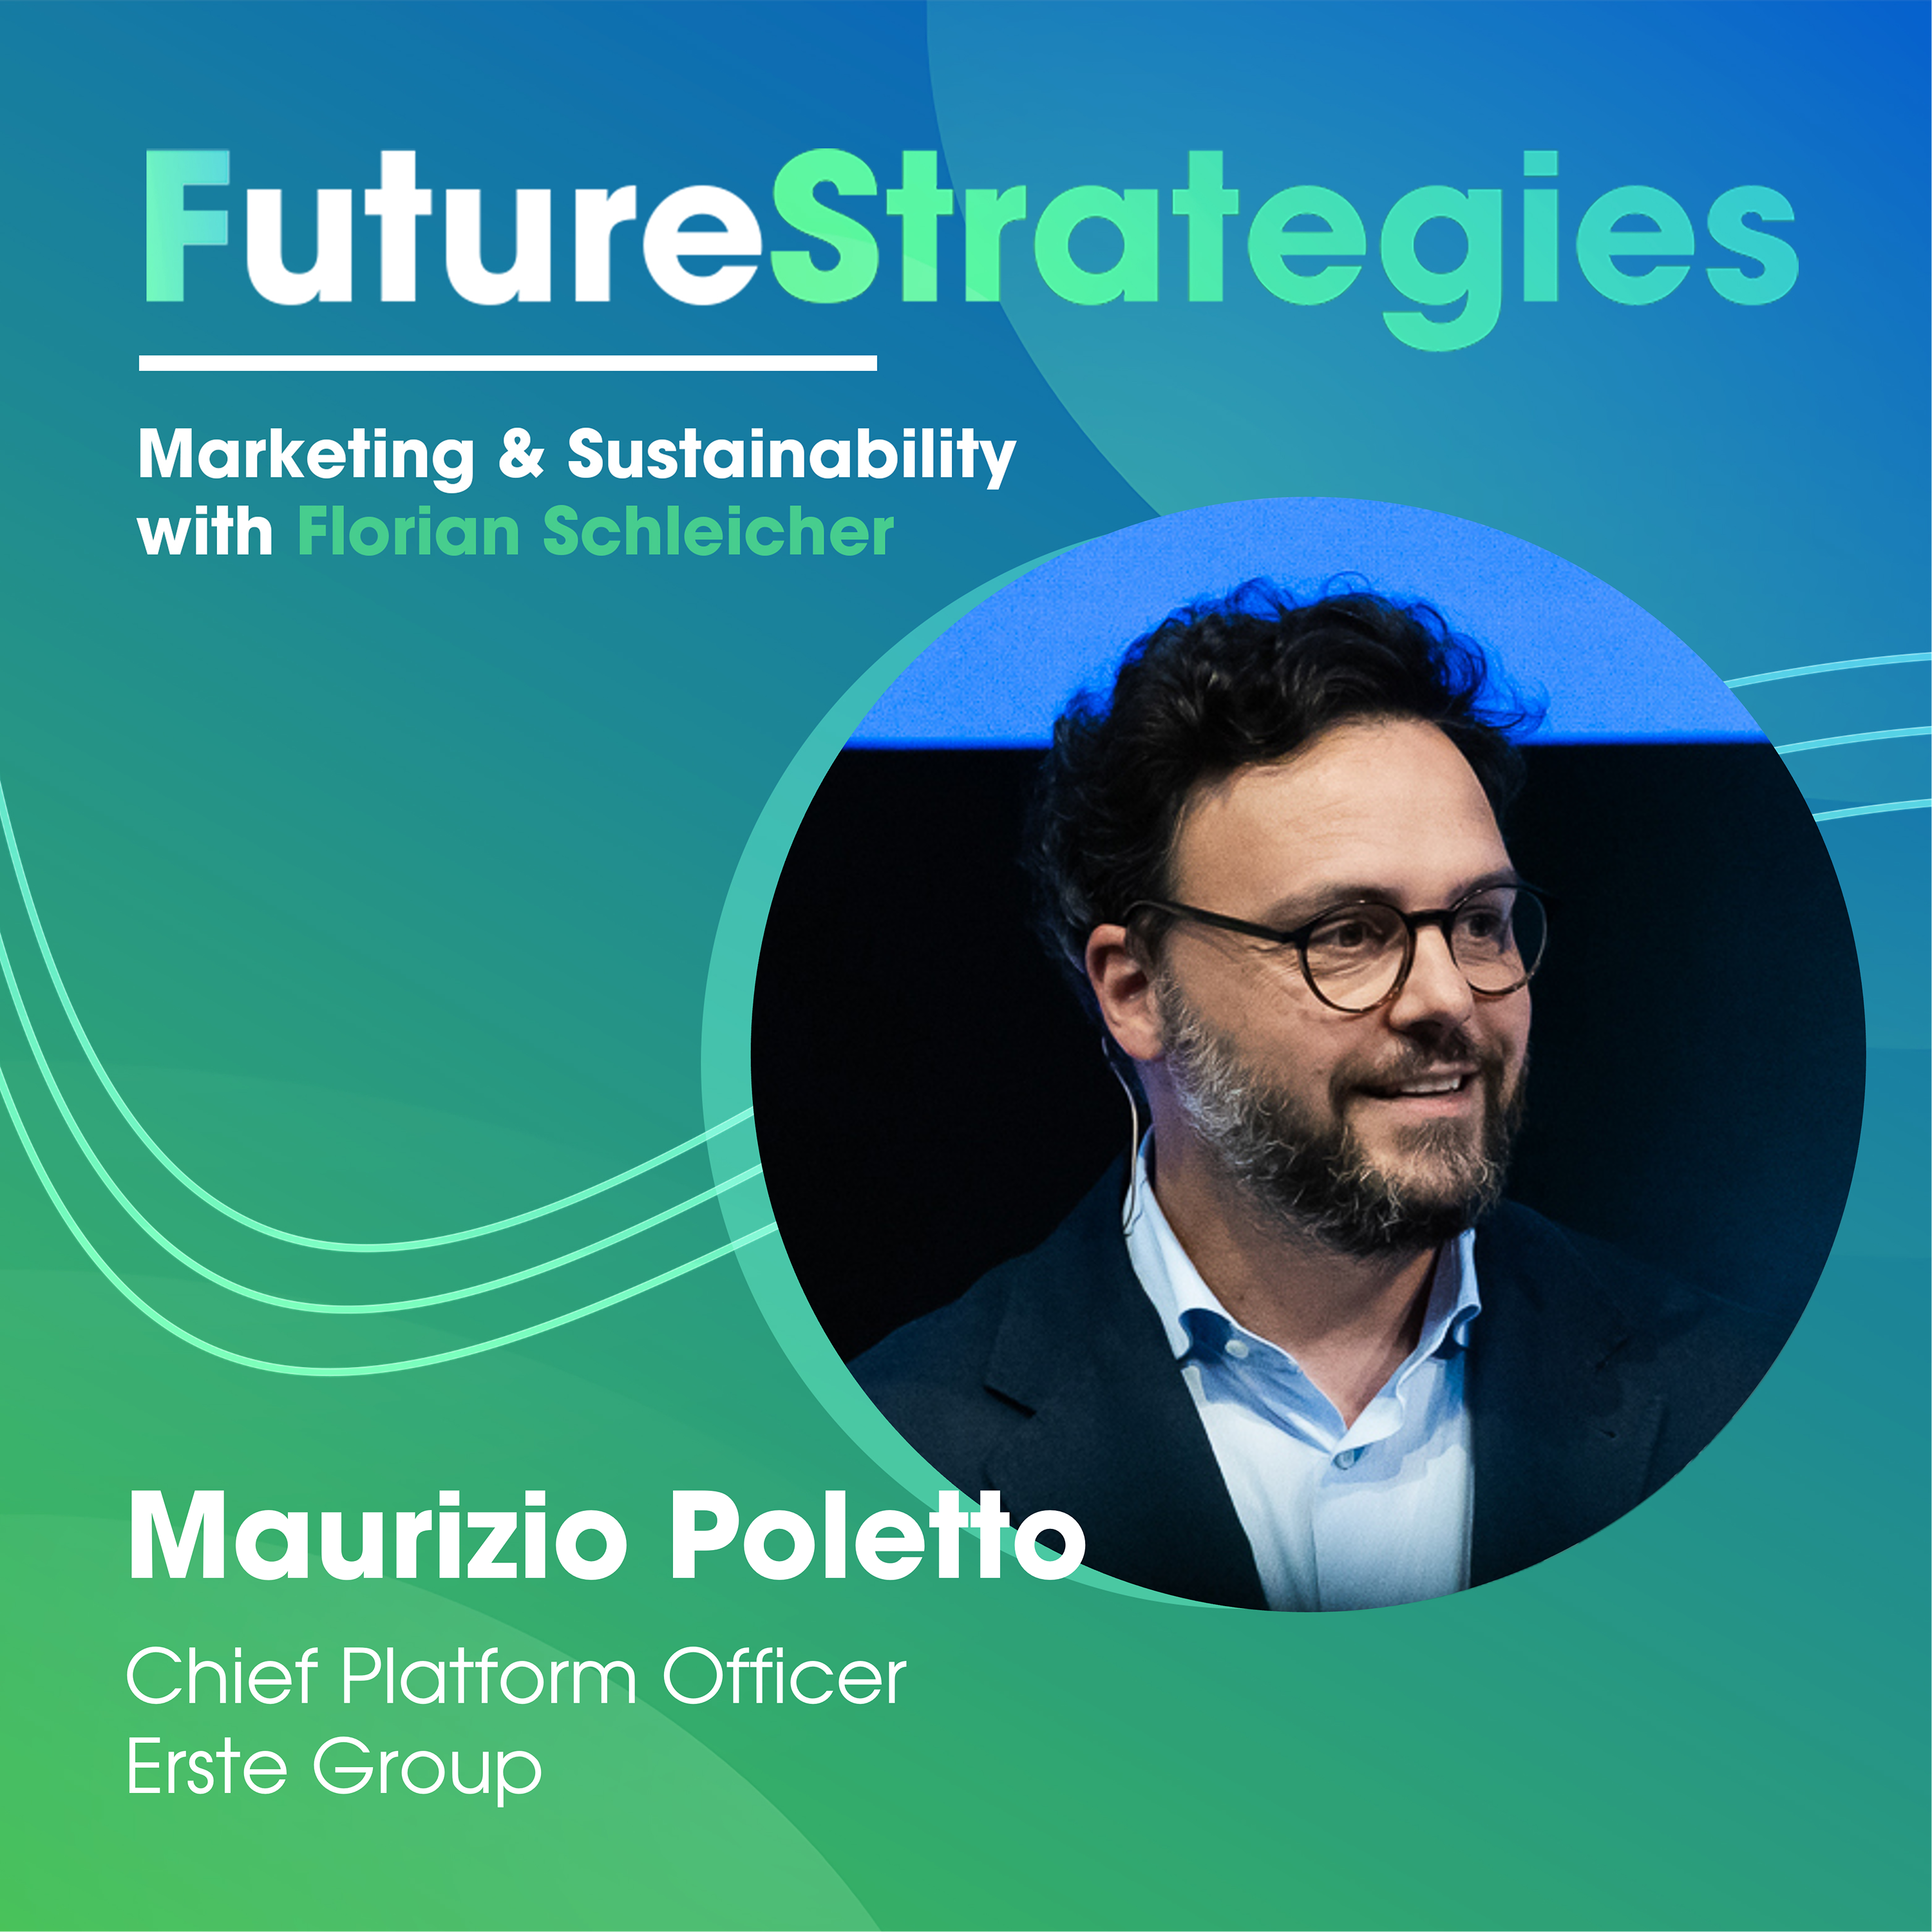 🏆 ”Organisations are driven by success stories” - Maurizio Poletto from Erste Group about innovation and sustainability